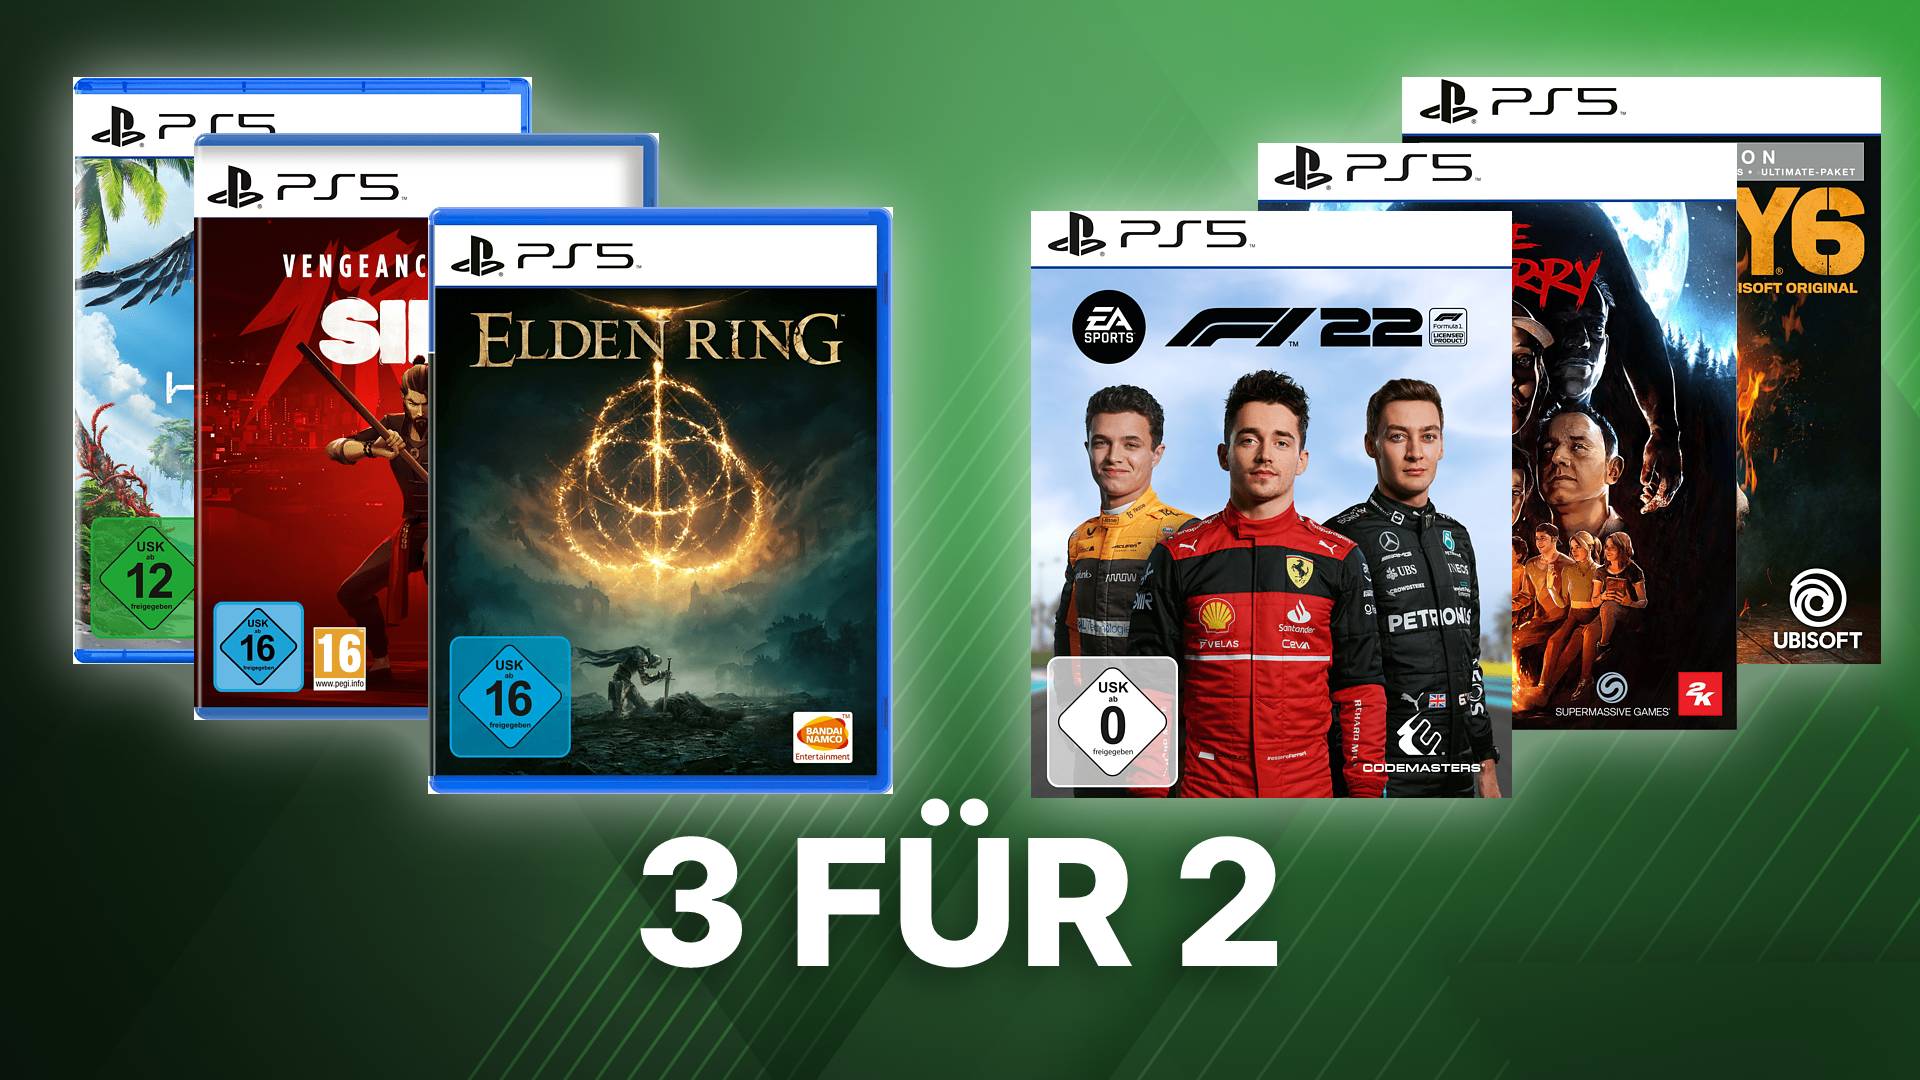 Elden Ring, Horizon and Co.: 3-for-2 campaign started at MediaMarkt